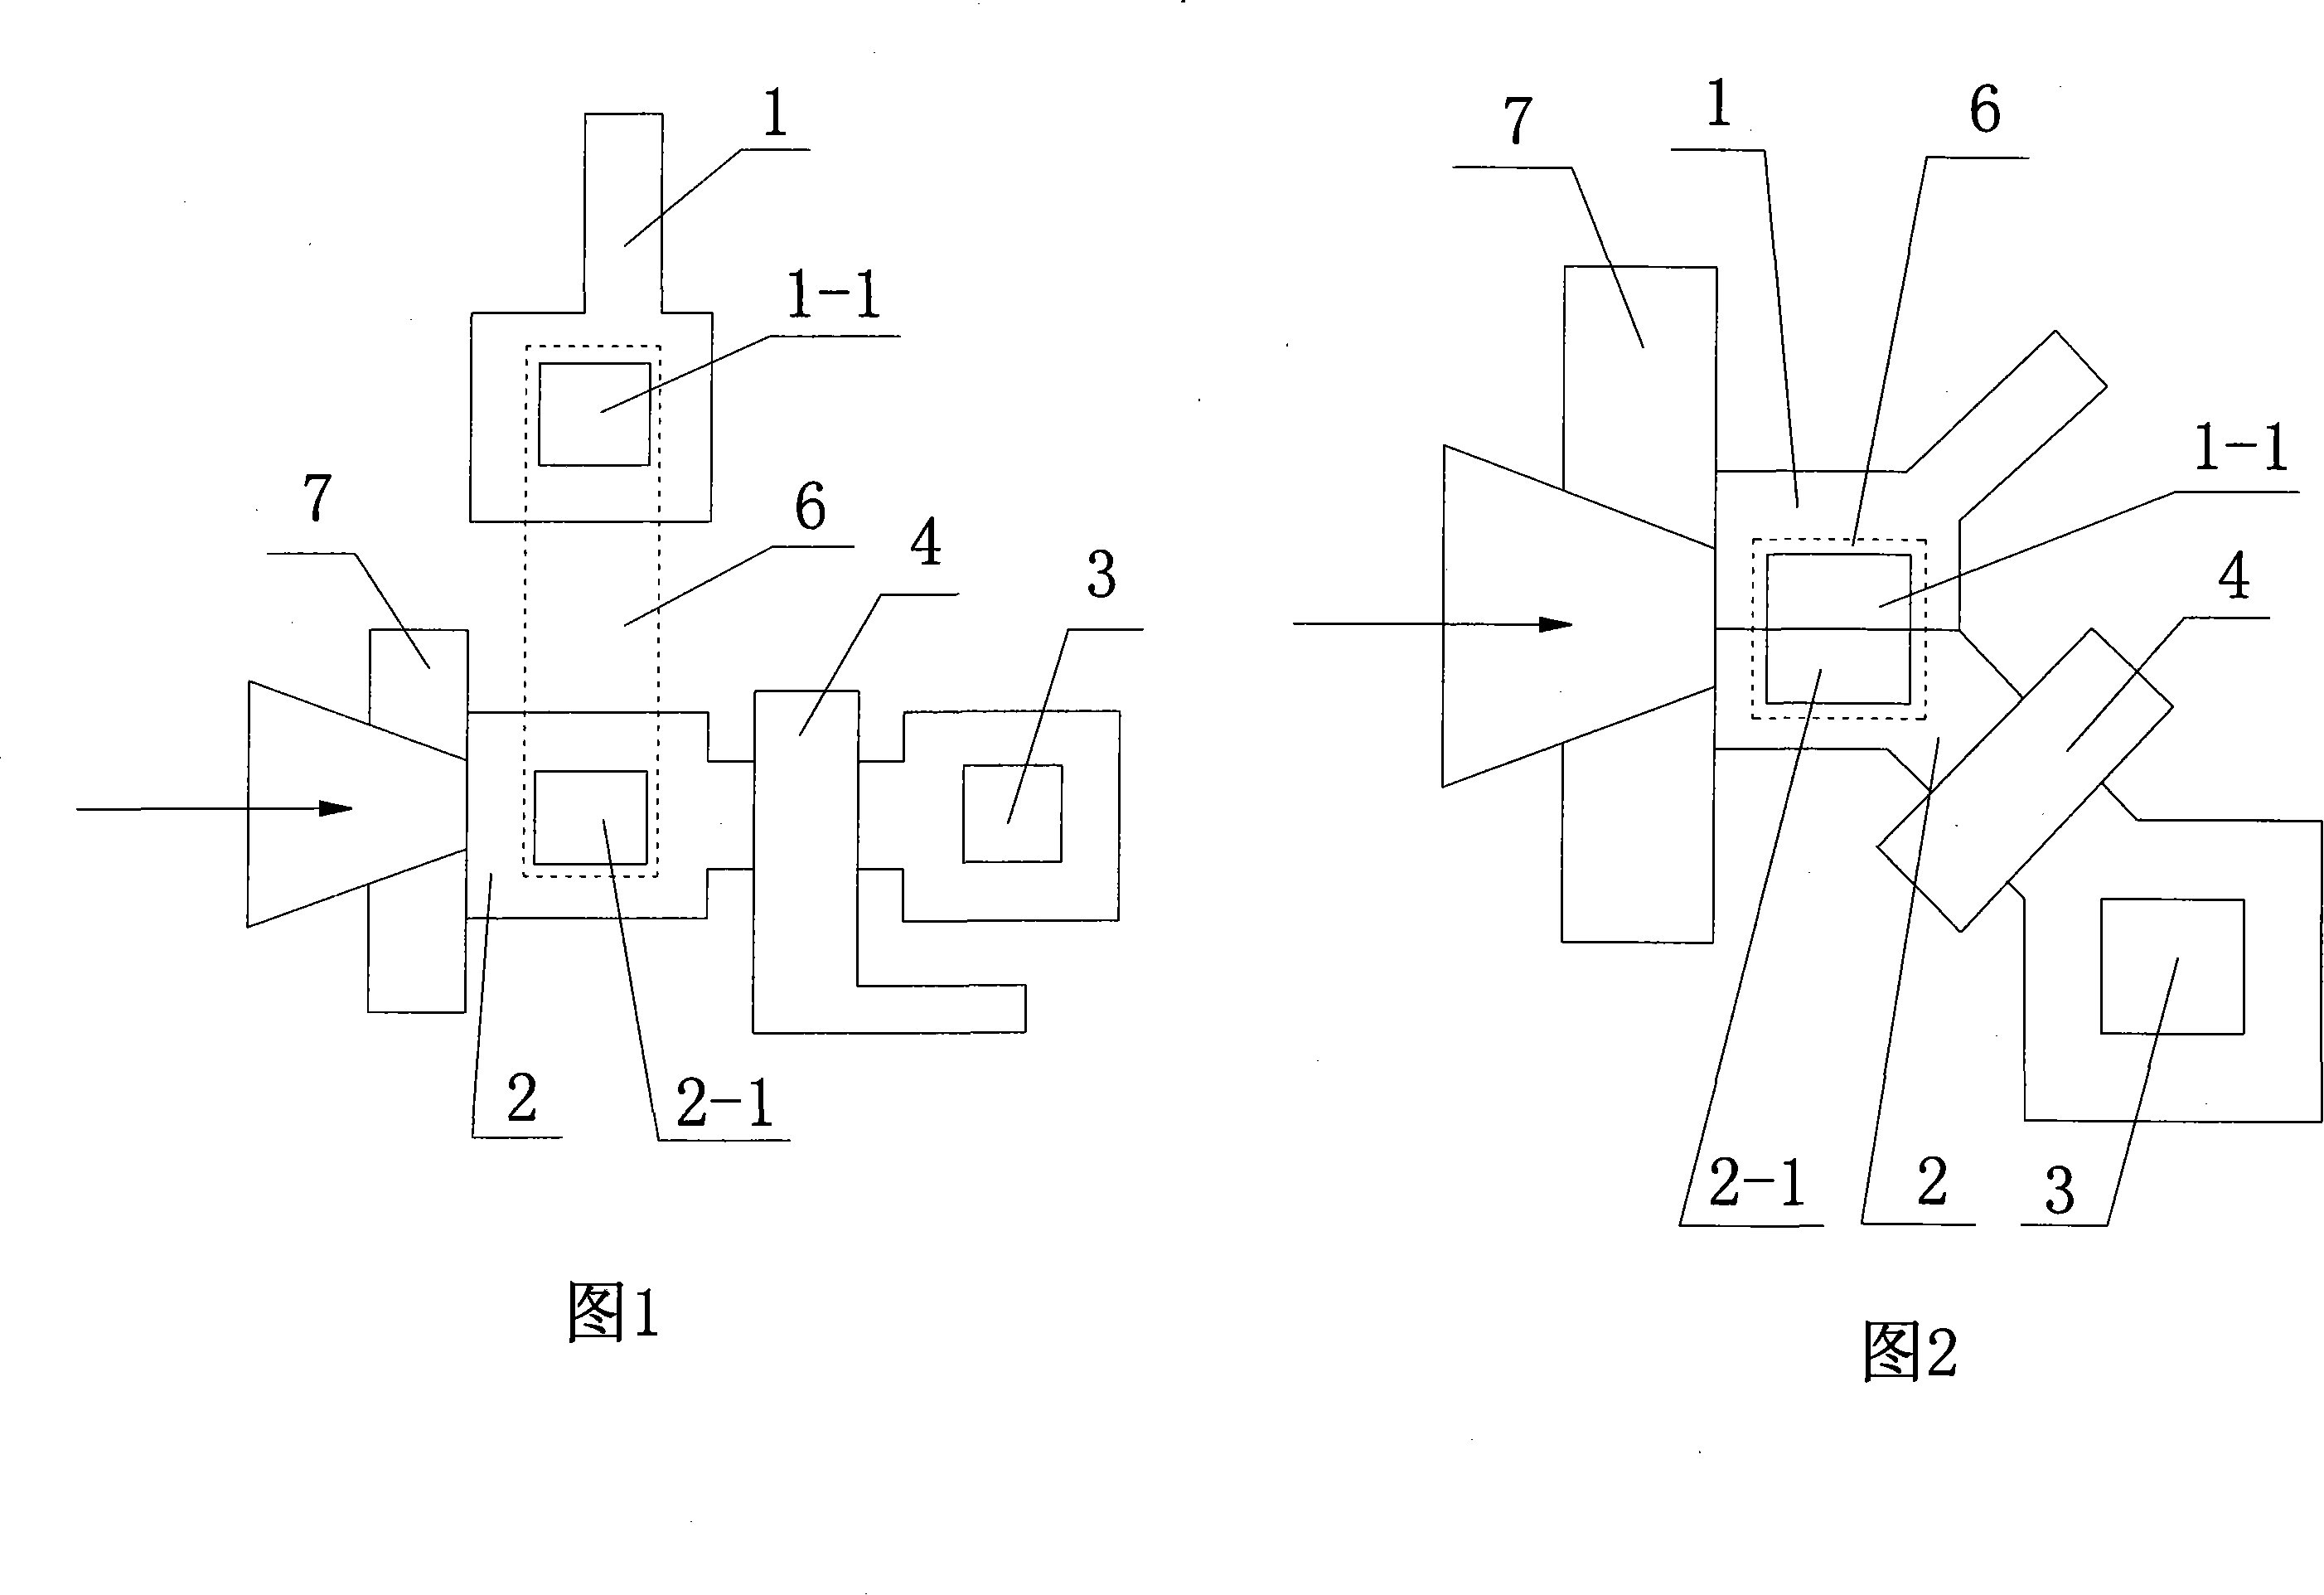 CCD output node with single-hold structure